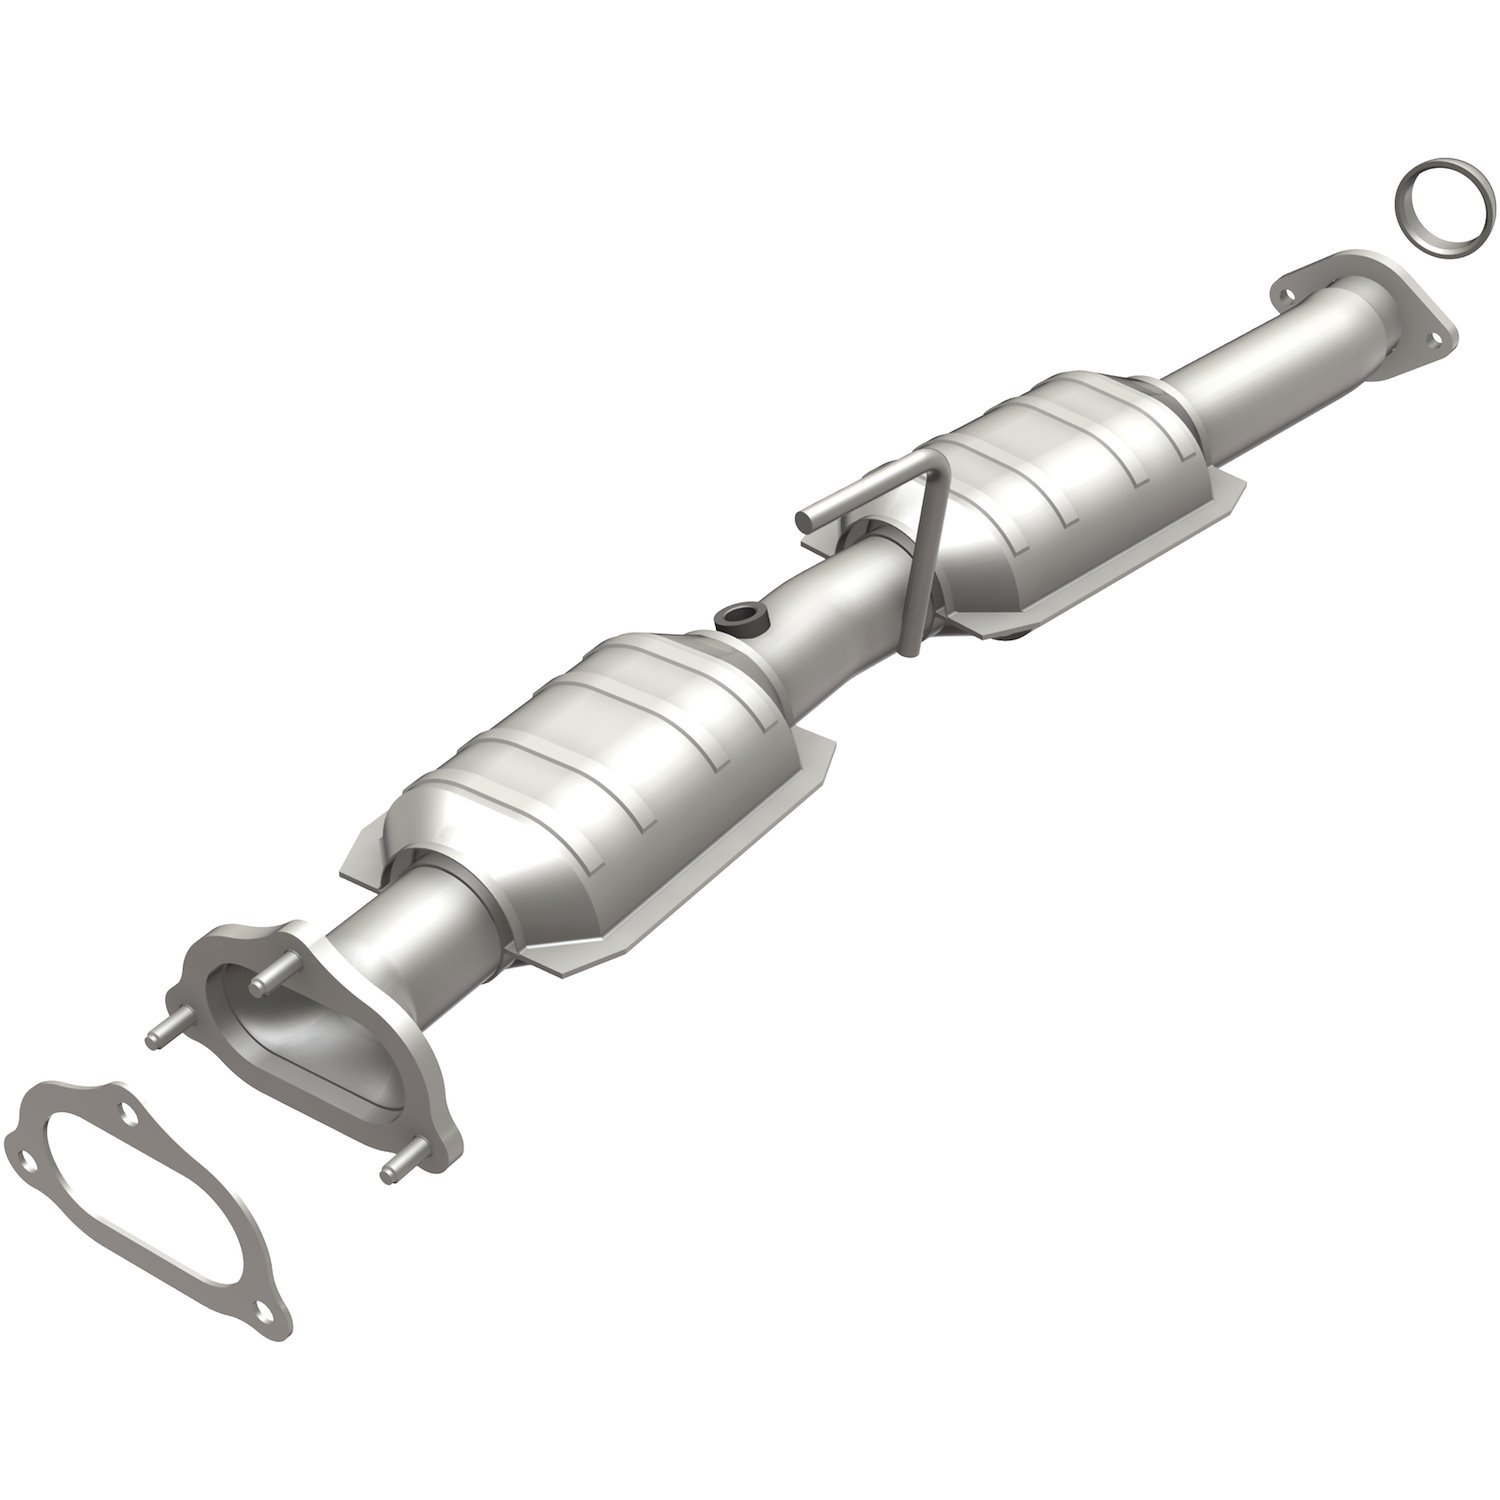 OEM Grade Federal / EPA Compliant Direct-Fit Catalytic Converter 51379